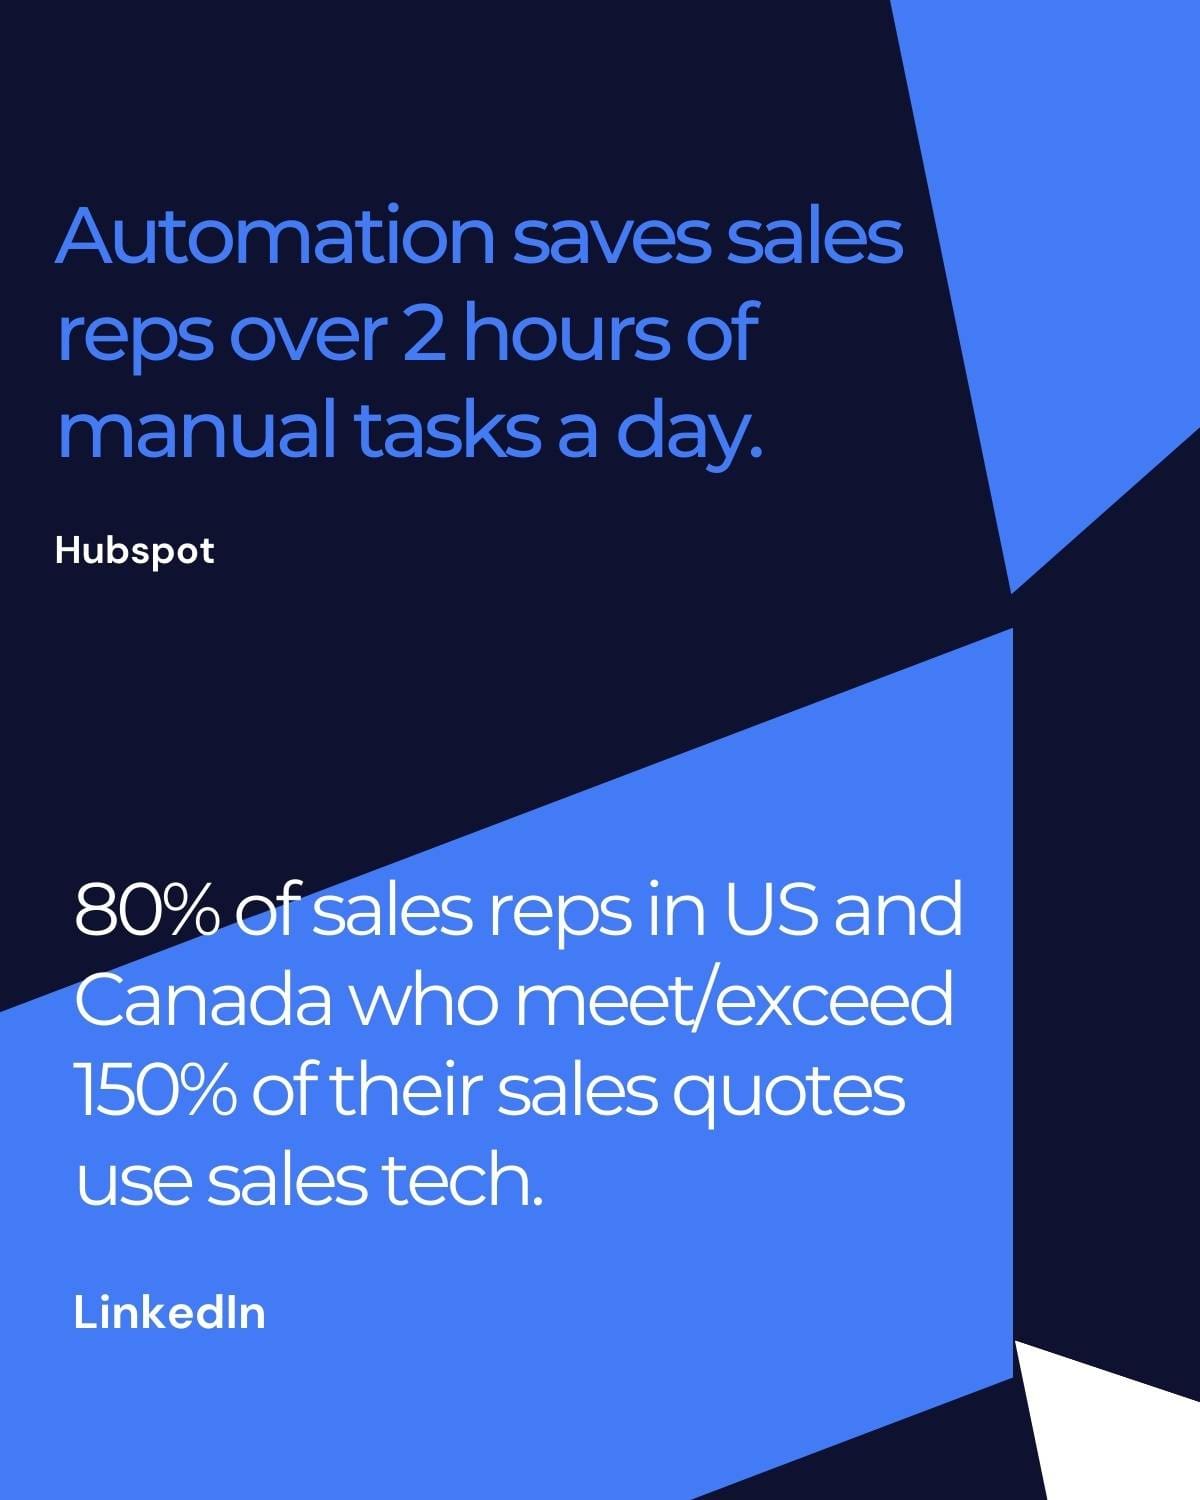 A blue and black graphic with stats 1) automation saves sales 2 hours a day 2) 80% of reps who meet/exceed 150% of their quotas use sales tech